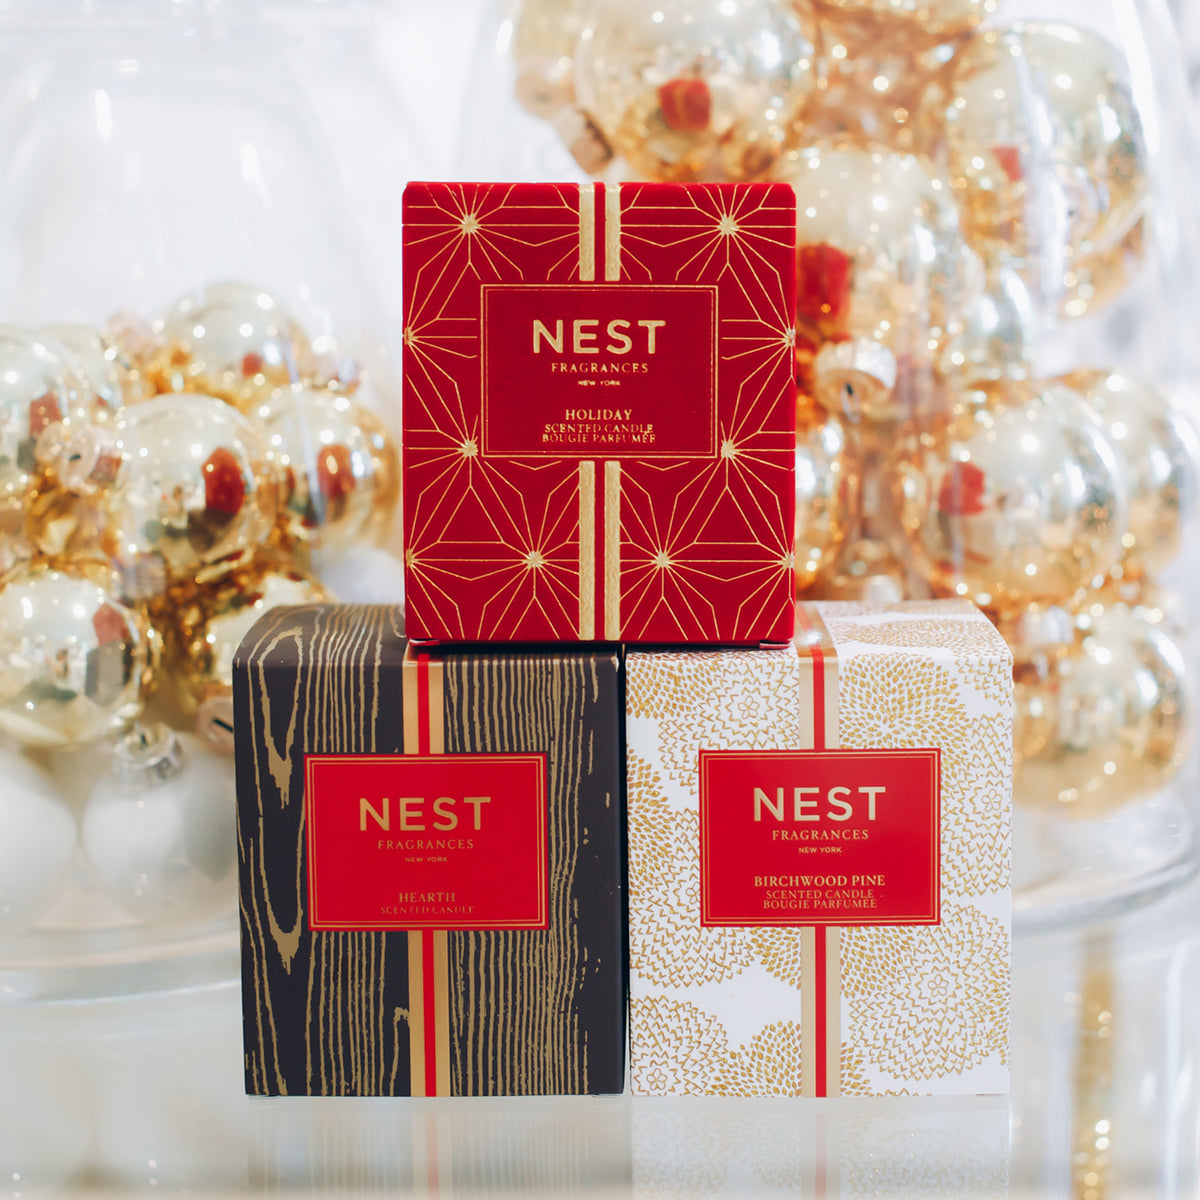 Image of Nest holiday candles